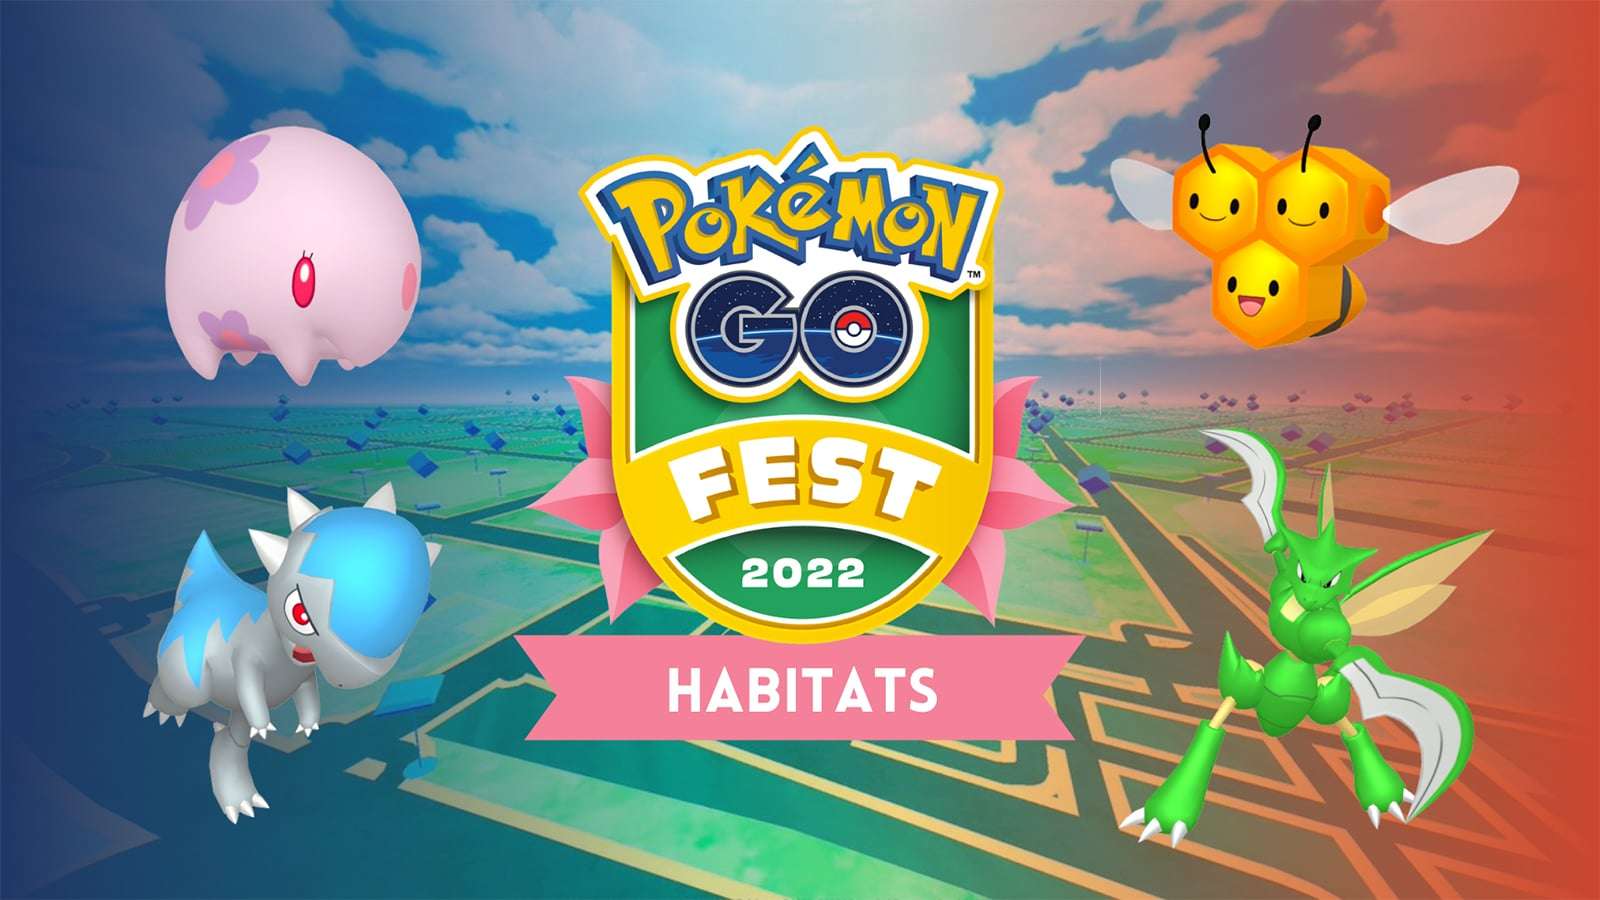 Scyther appearing in the Pokemon Go Fest Finale Habitat spawn schedule